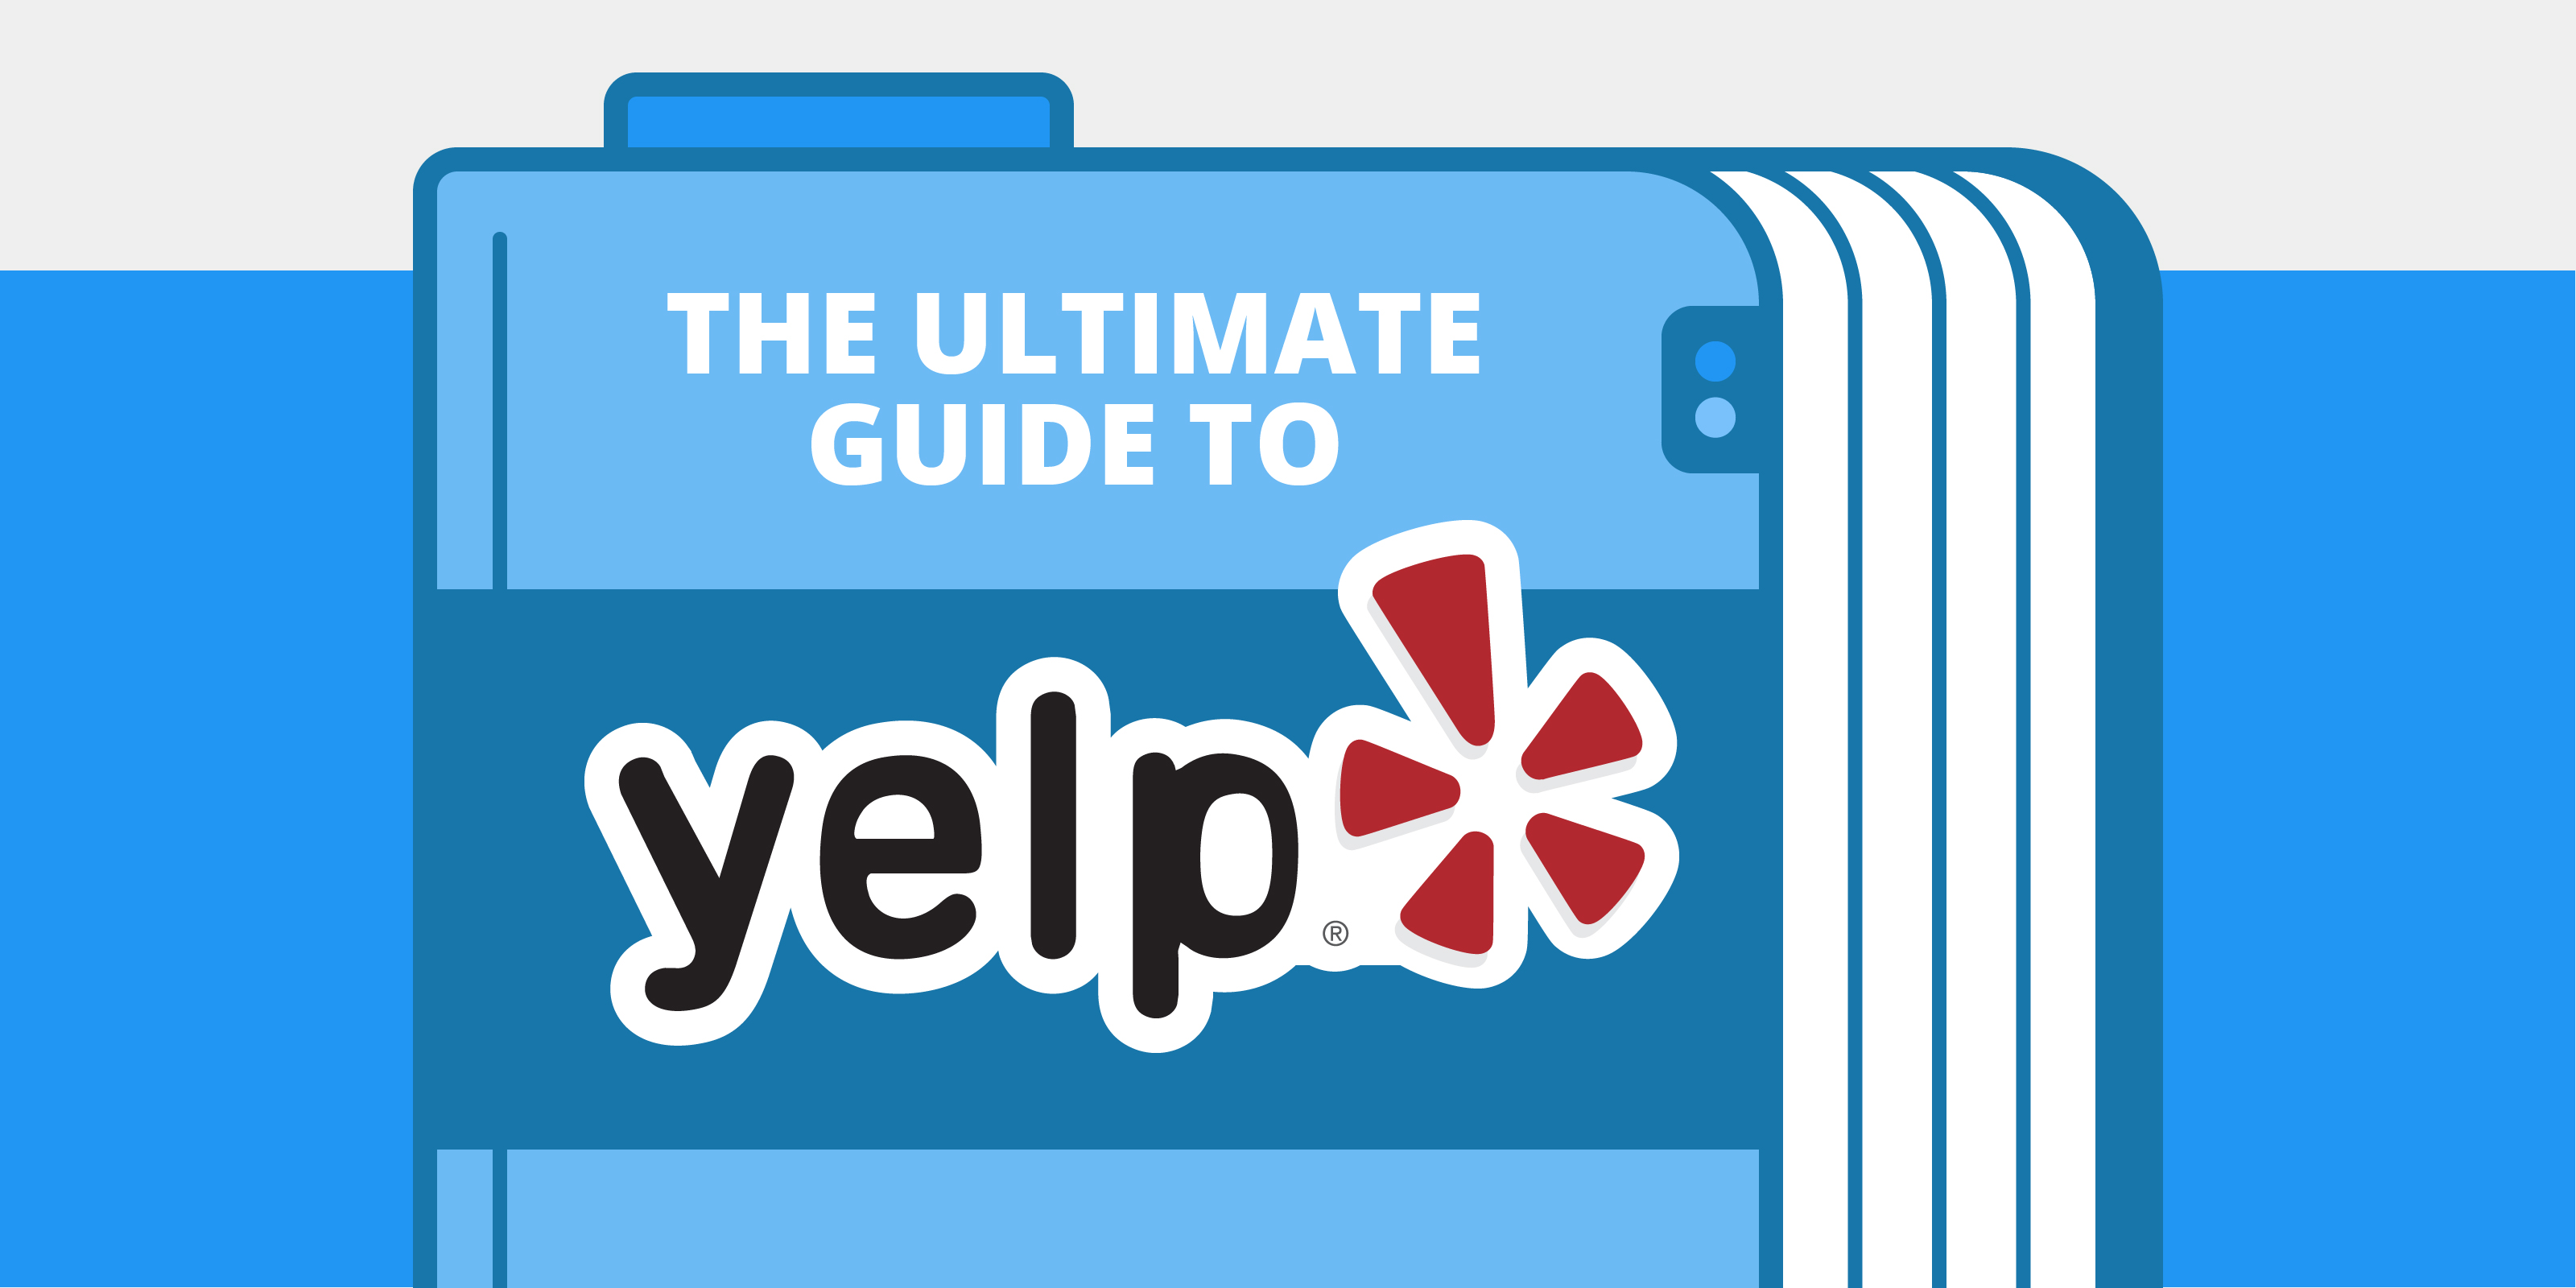 Send Yelp: Guide to Yelp for Business Owners - Visual Contenting